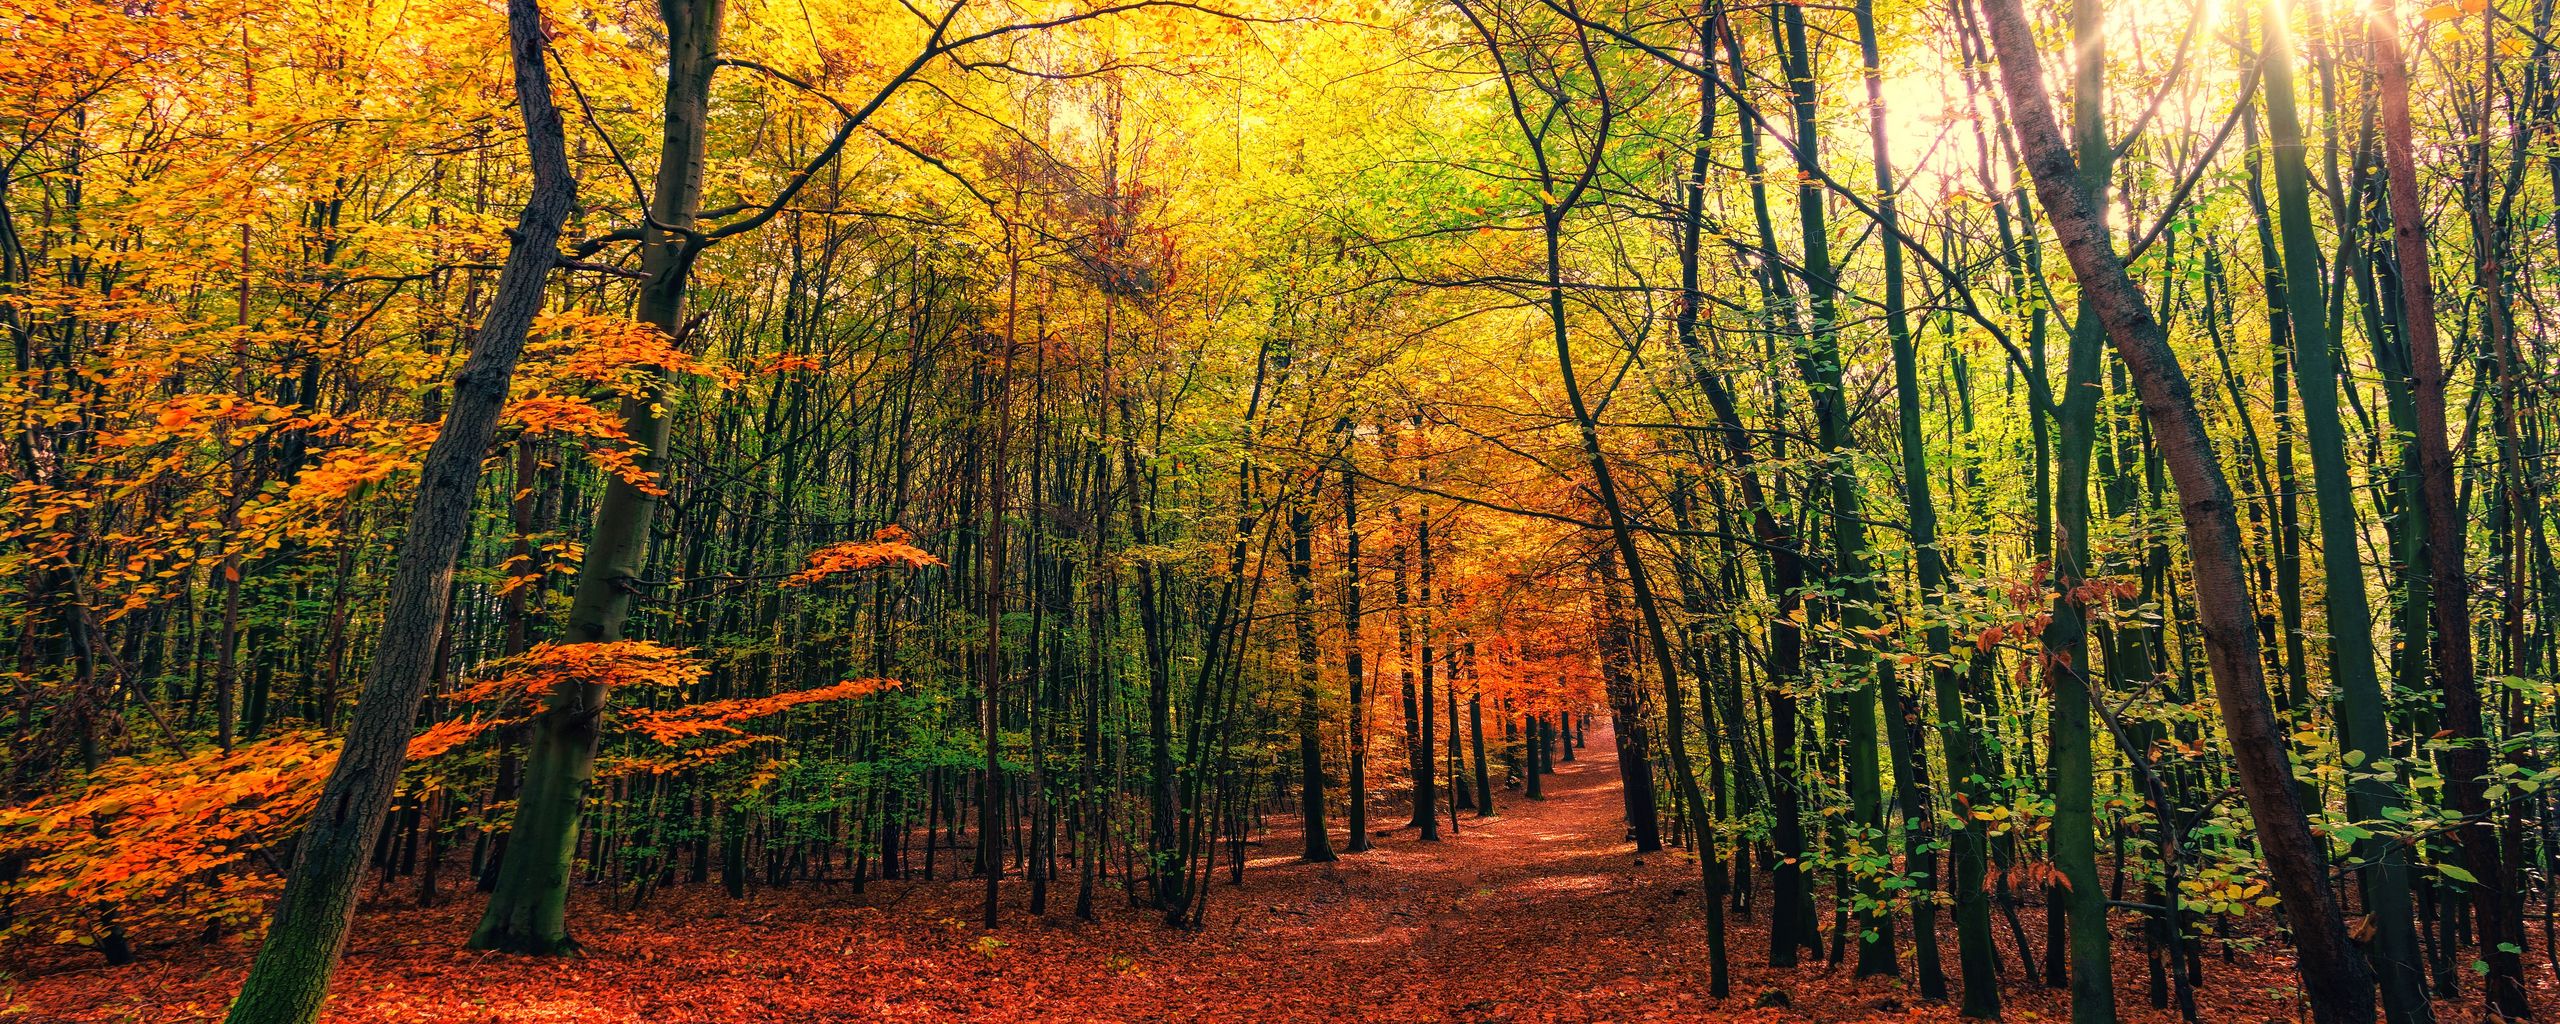 Download wallpapers 2560x1024 forest, trail, autumn, trees, leaves, fallen ultrawide monitor hd backgrounds